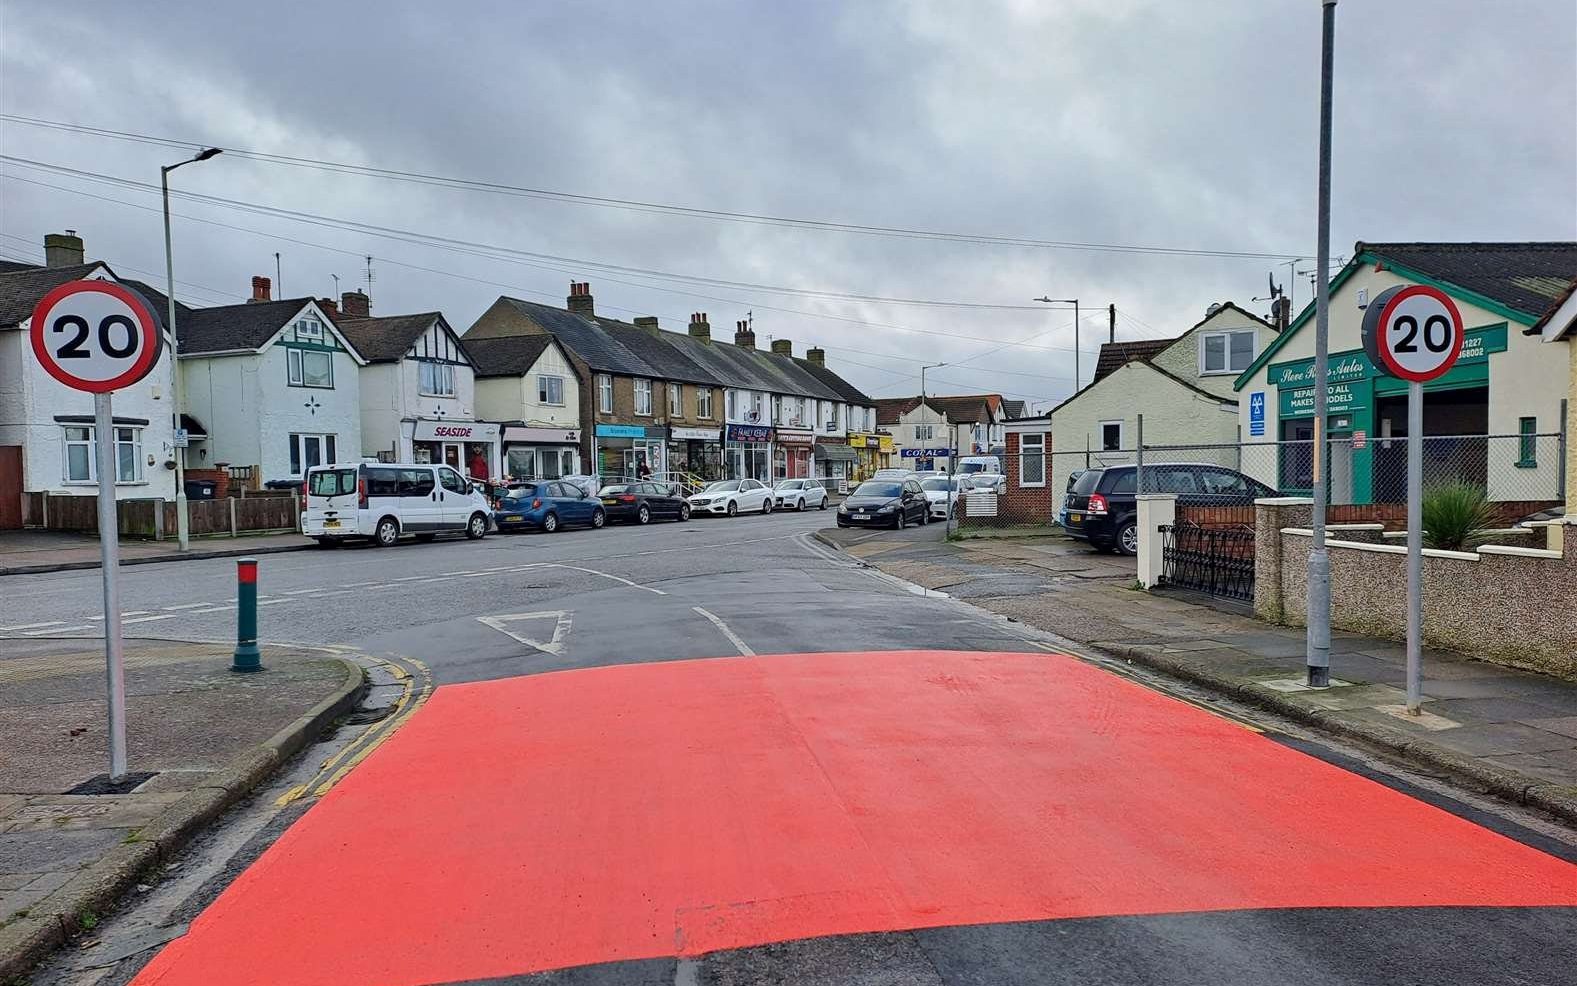 red fluorescent 20mph road markings ‘way too much’, residents say